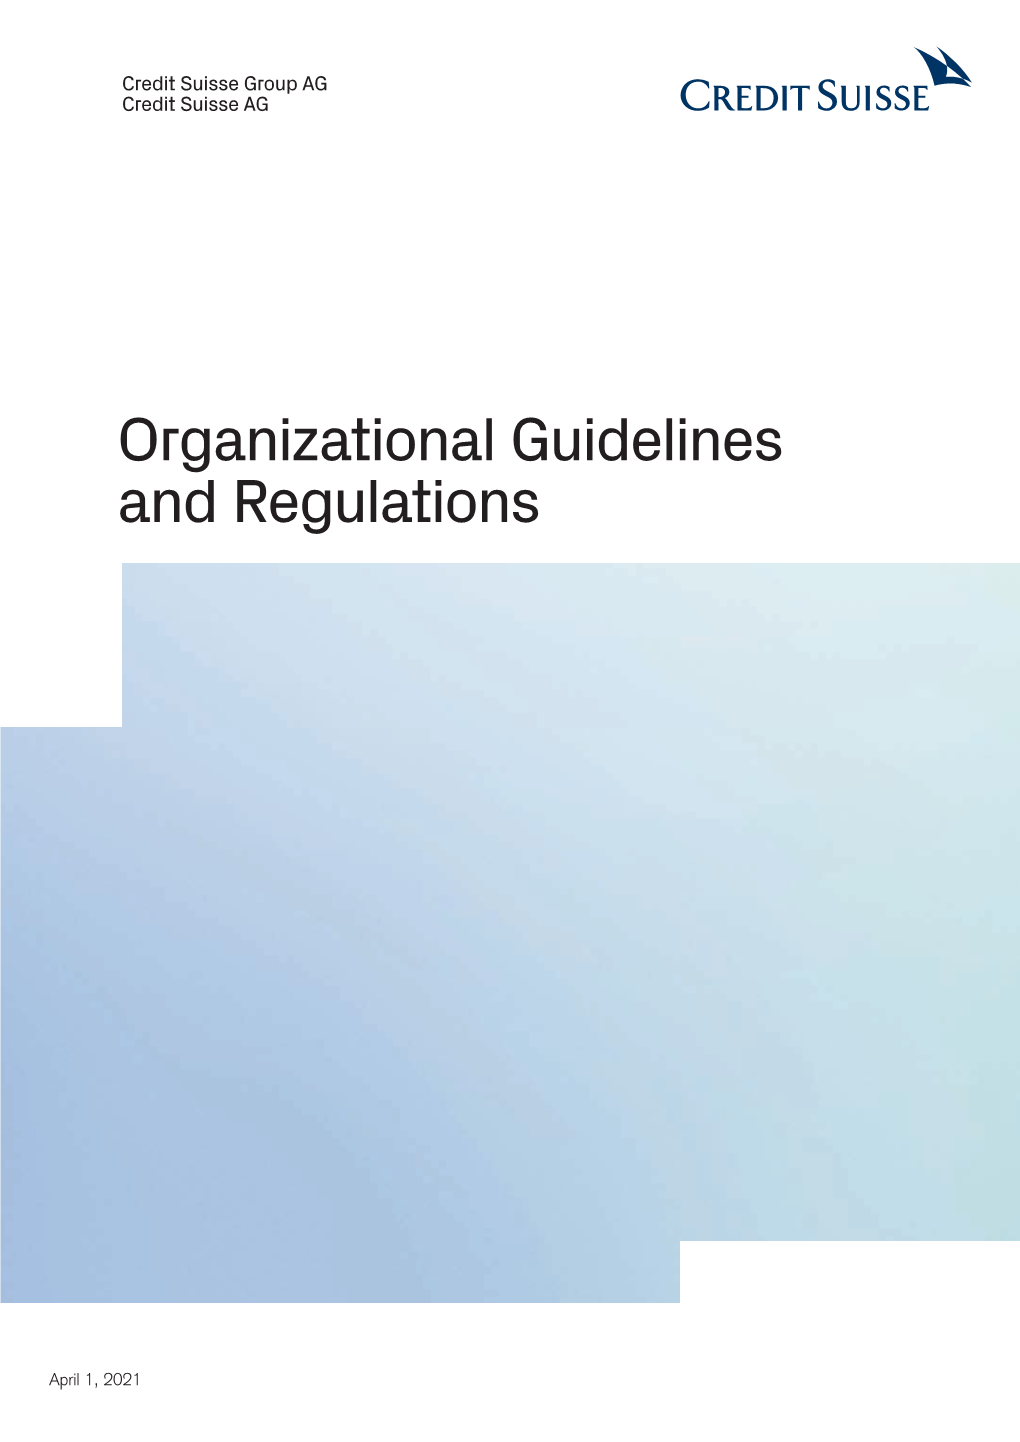 Organizational Guidelines and Regulations